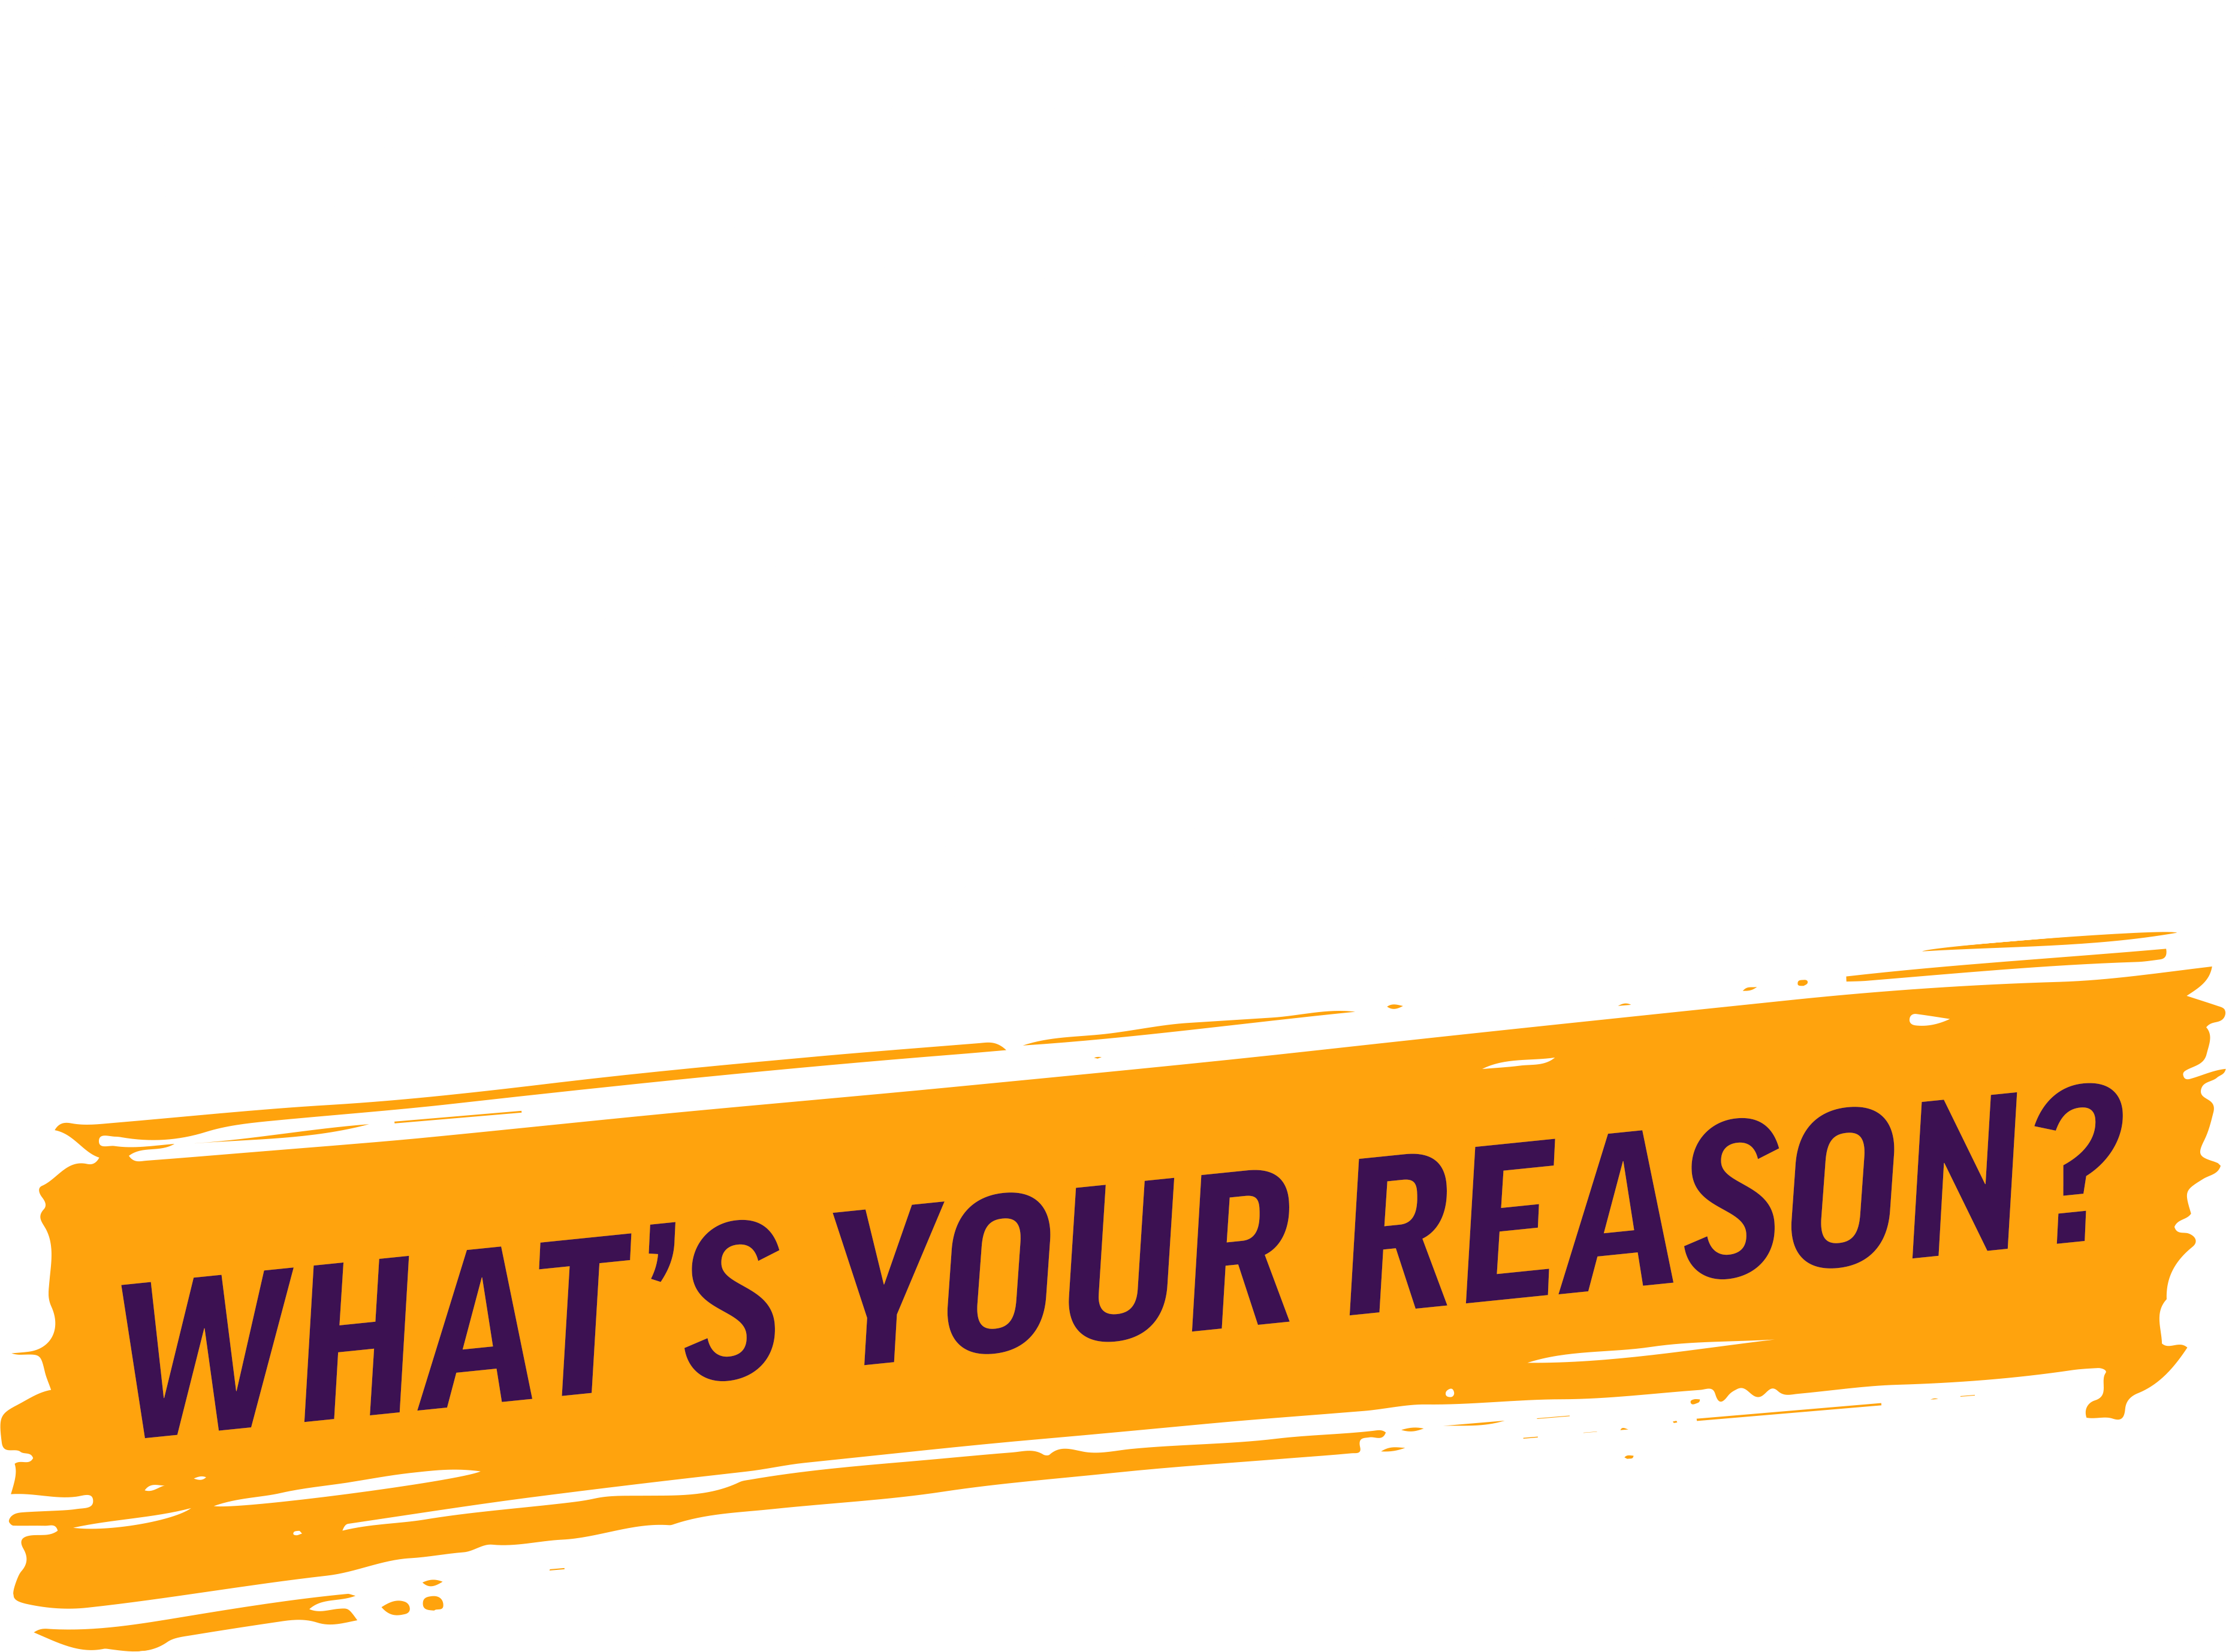 I can change the future. What's your reason?